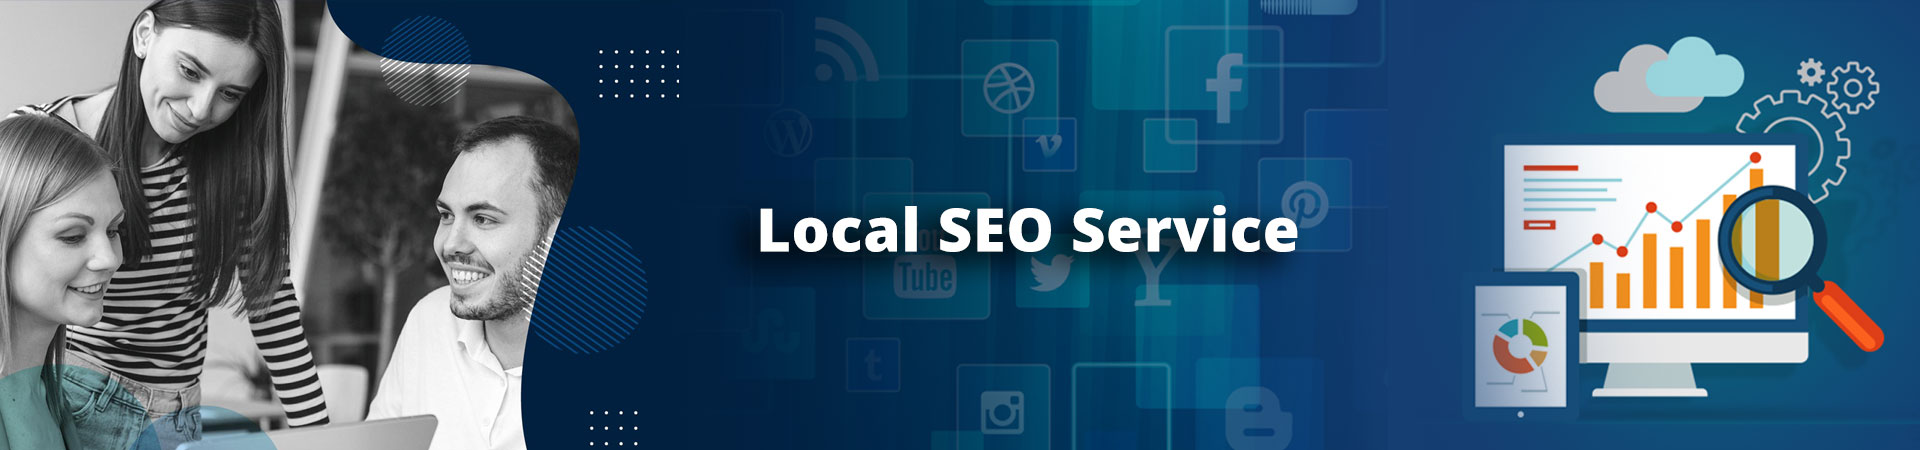 Local SEO Service Packages